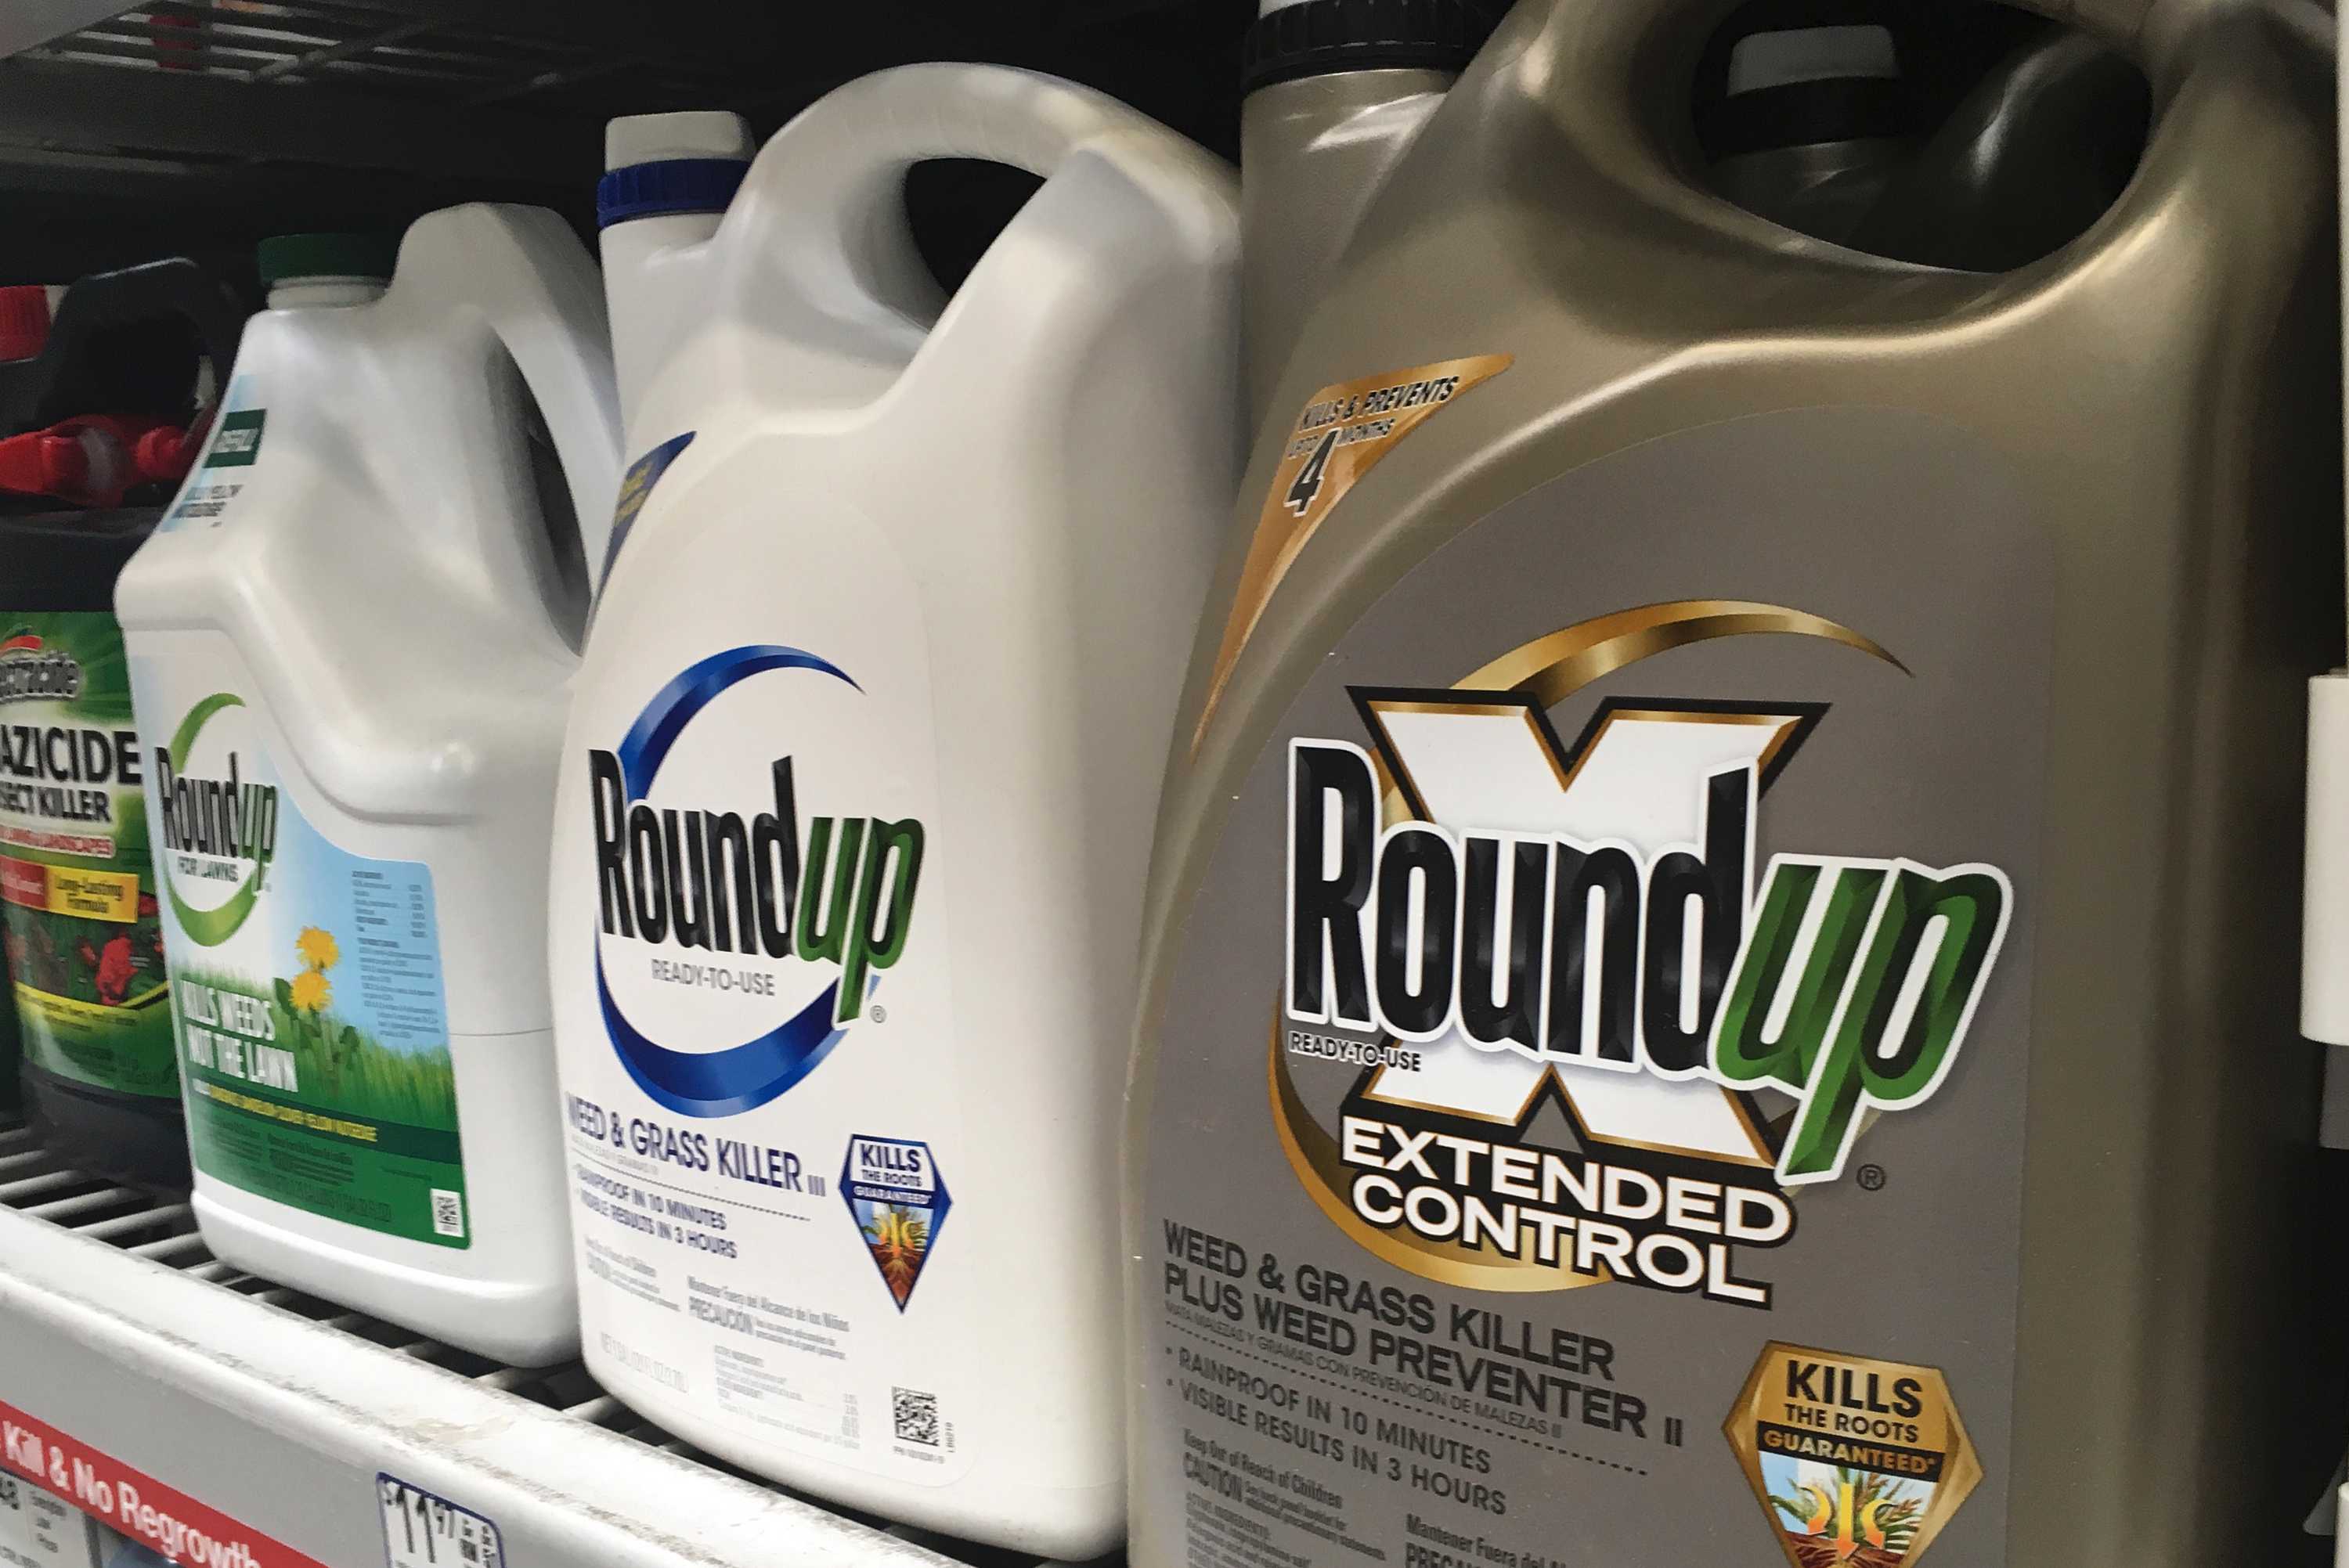 Bayer pays out $15.9b to settle Roundup cancer claims - ABC News